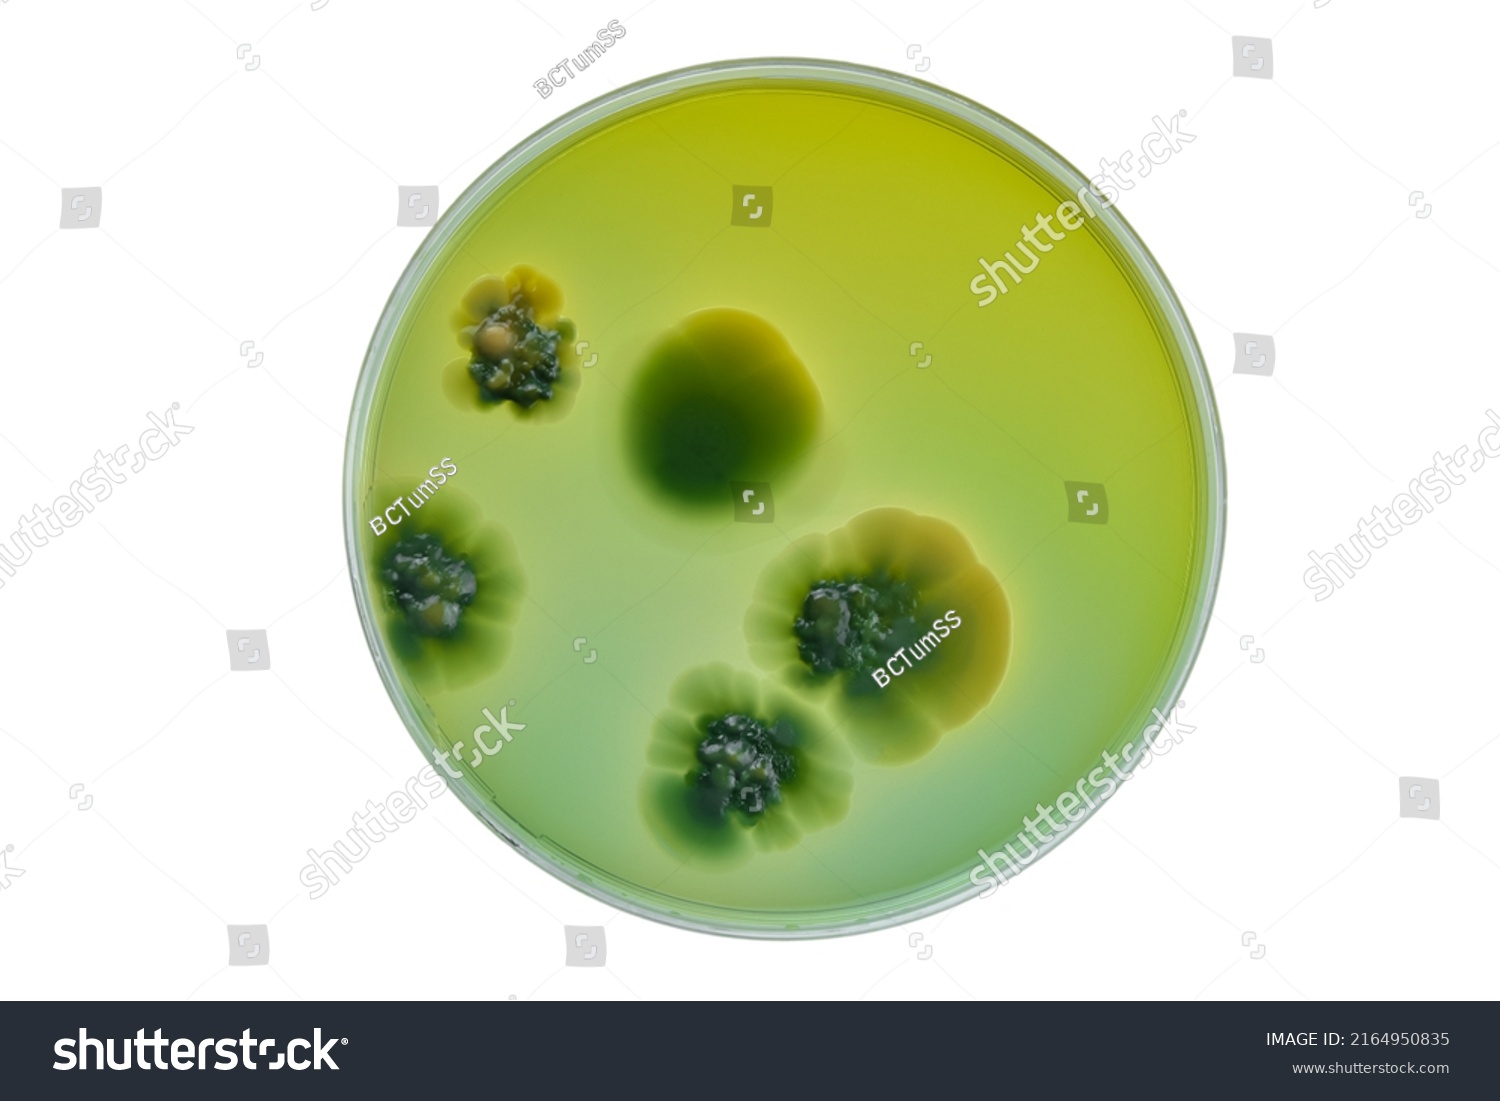 Petri dish and culture media with bacteria on white background with clipping, Test various germs, virus, Coronavirus, Corona, COVID-19, Microbial population count, Food science. #2164950835